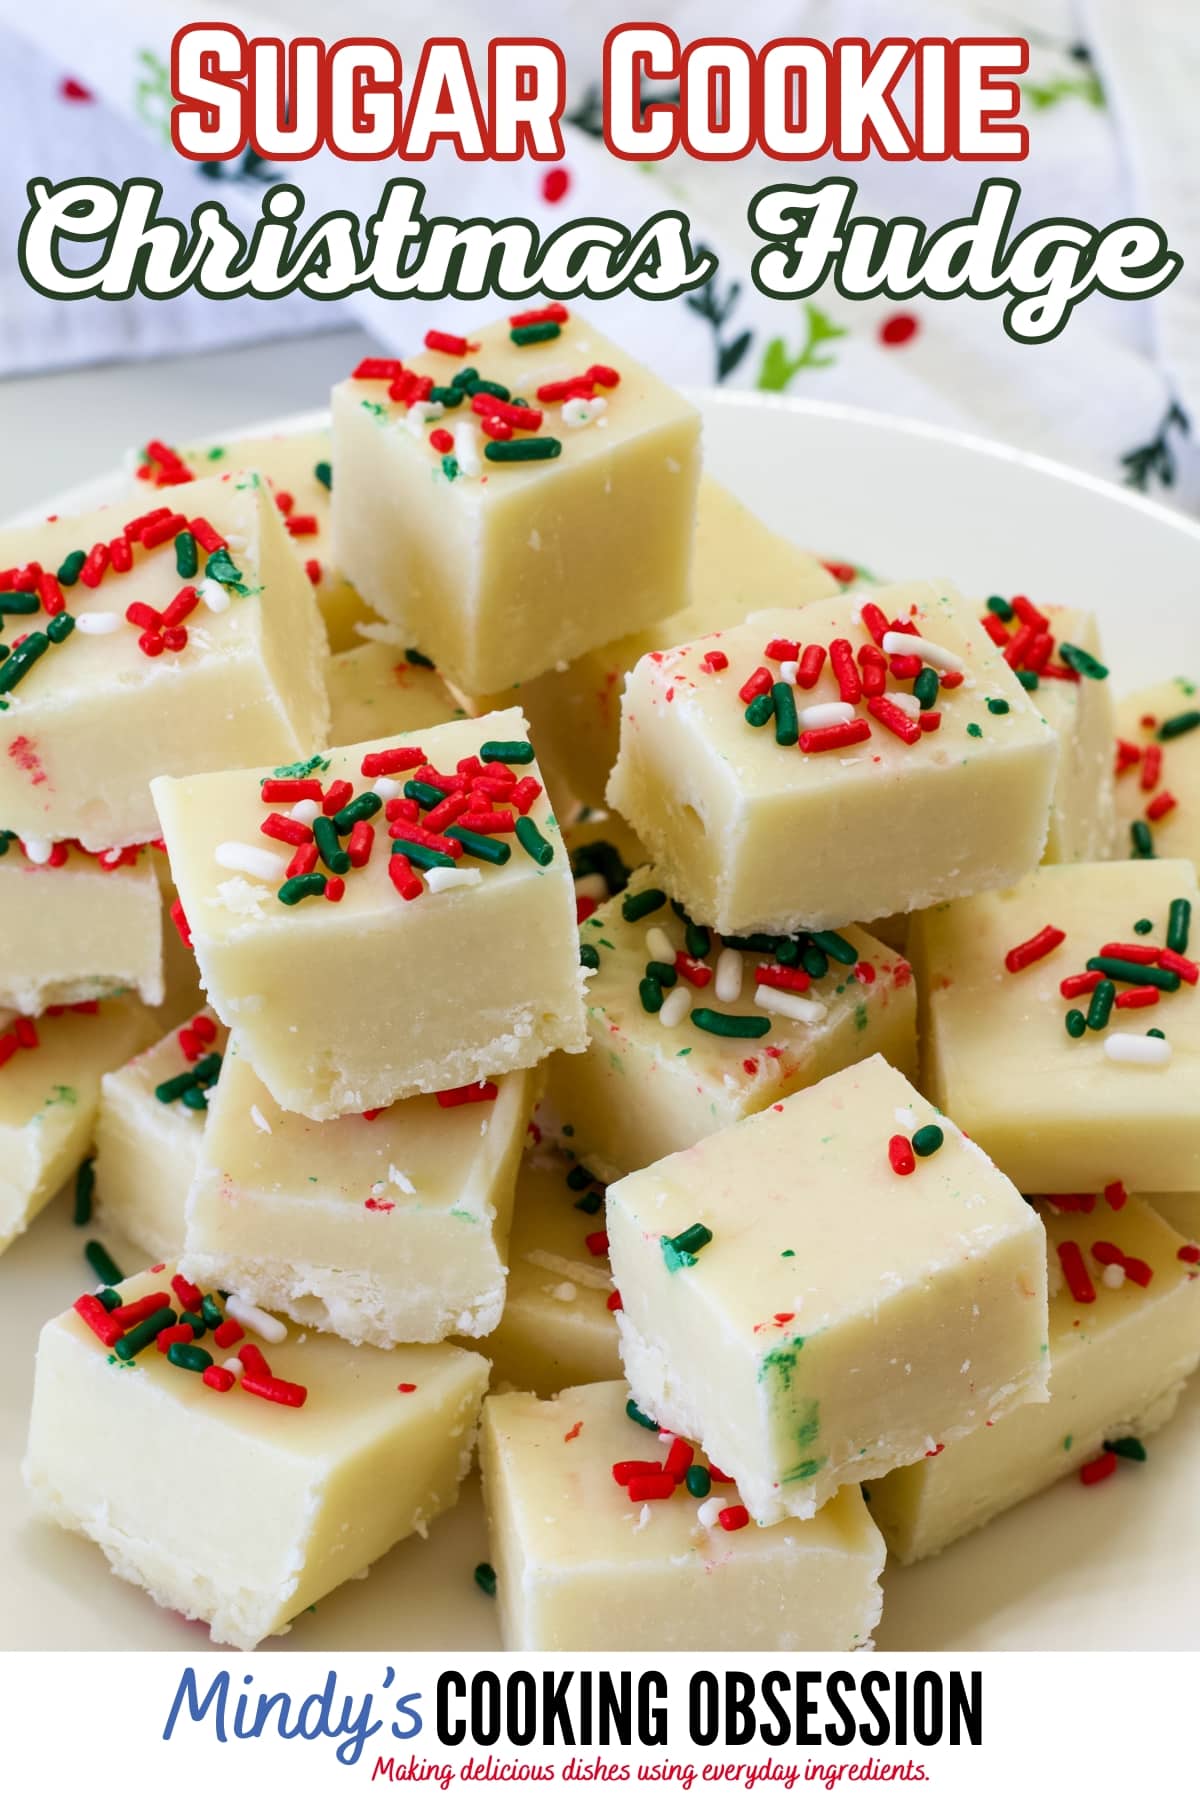 Whip up this Sugar Cookie Christmas Fudge recipe with just 5 ingredients! Impress your guests with this deliciously festive treat. via @mindyscookingobsession